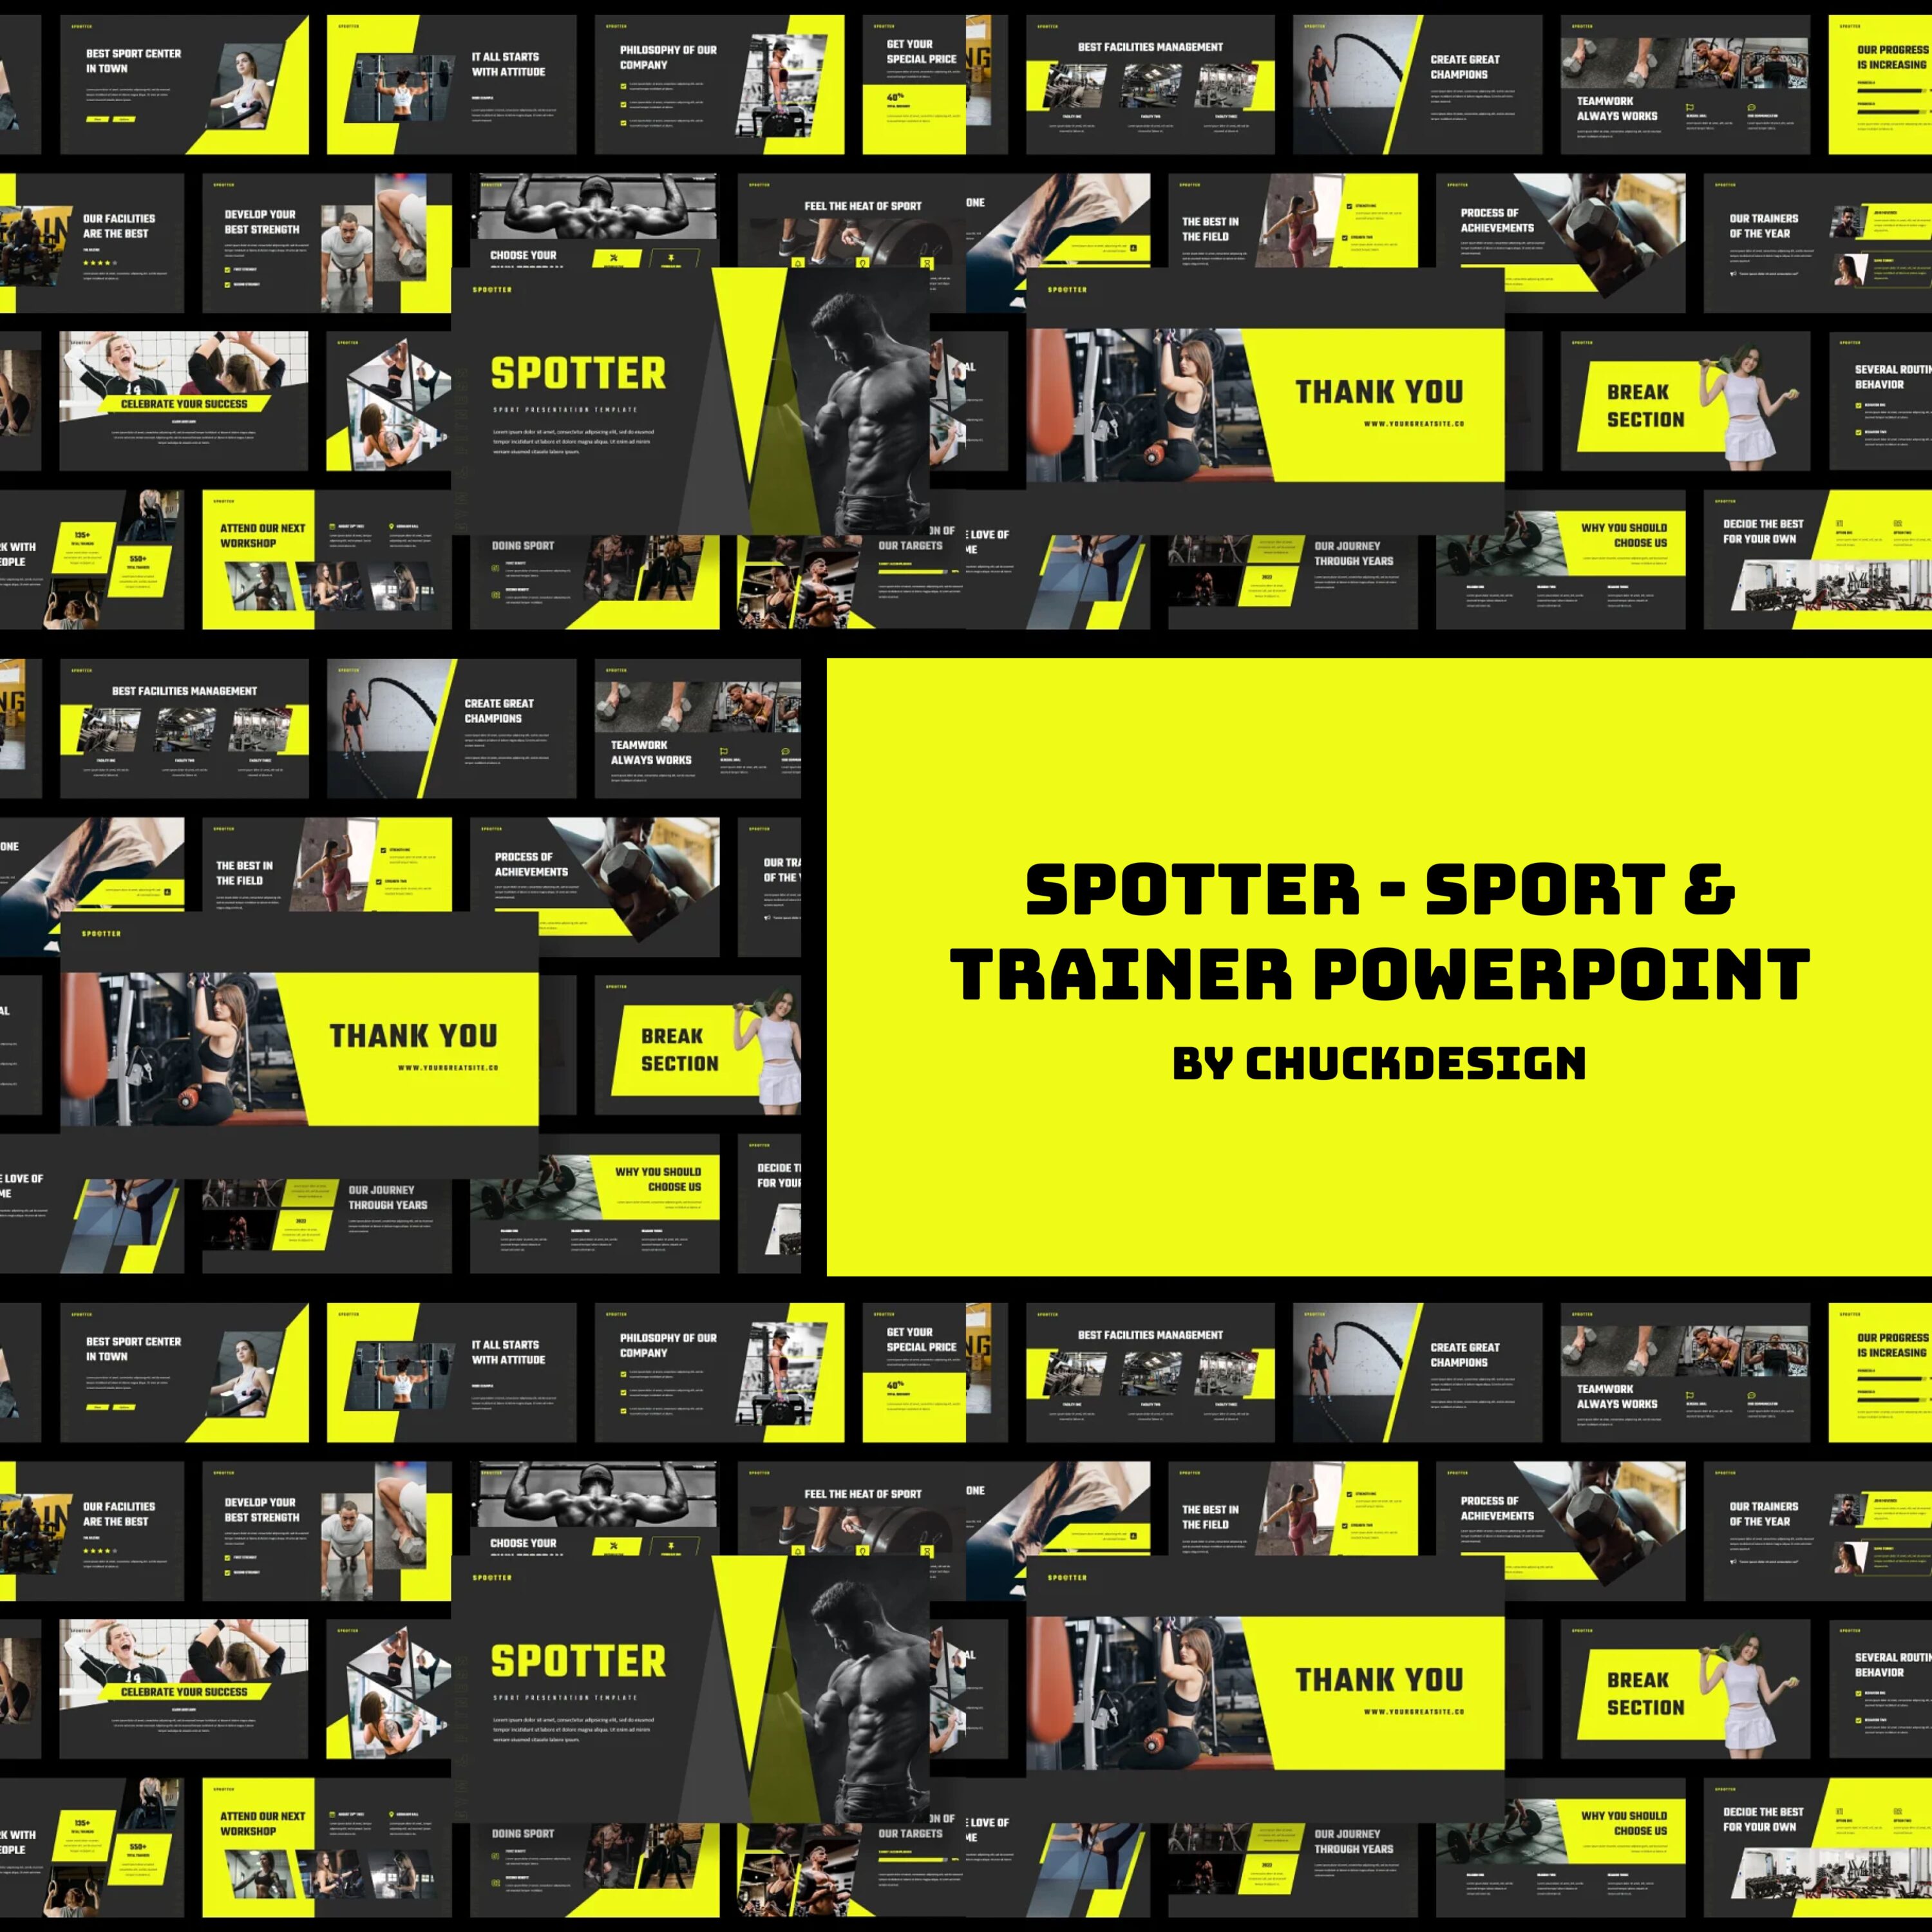 Spotter - Sport & Trainer PowerPoint cover.